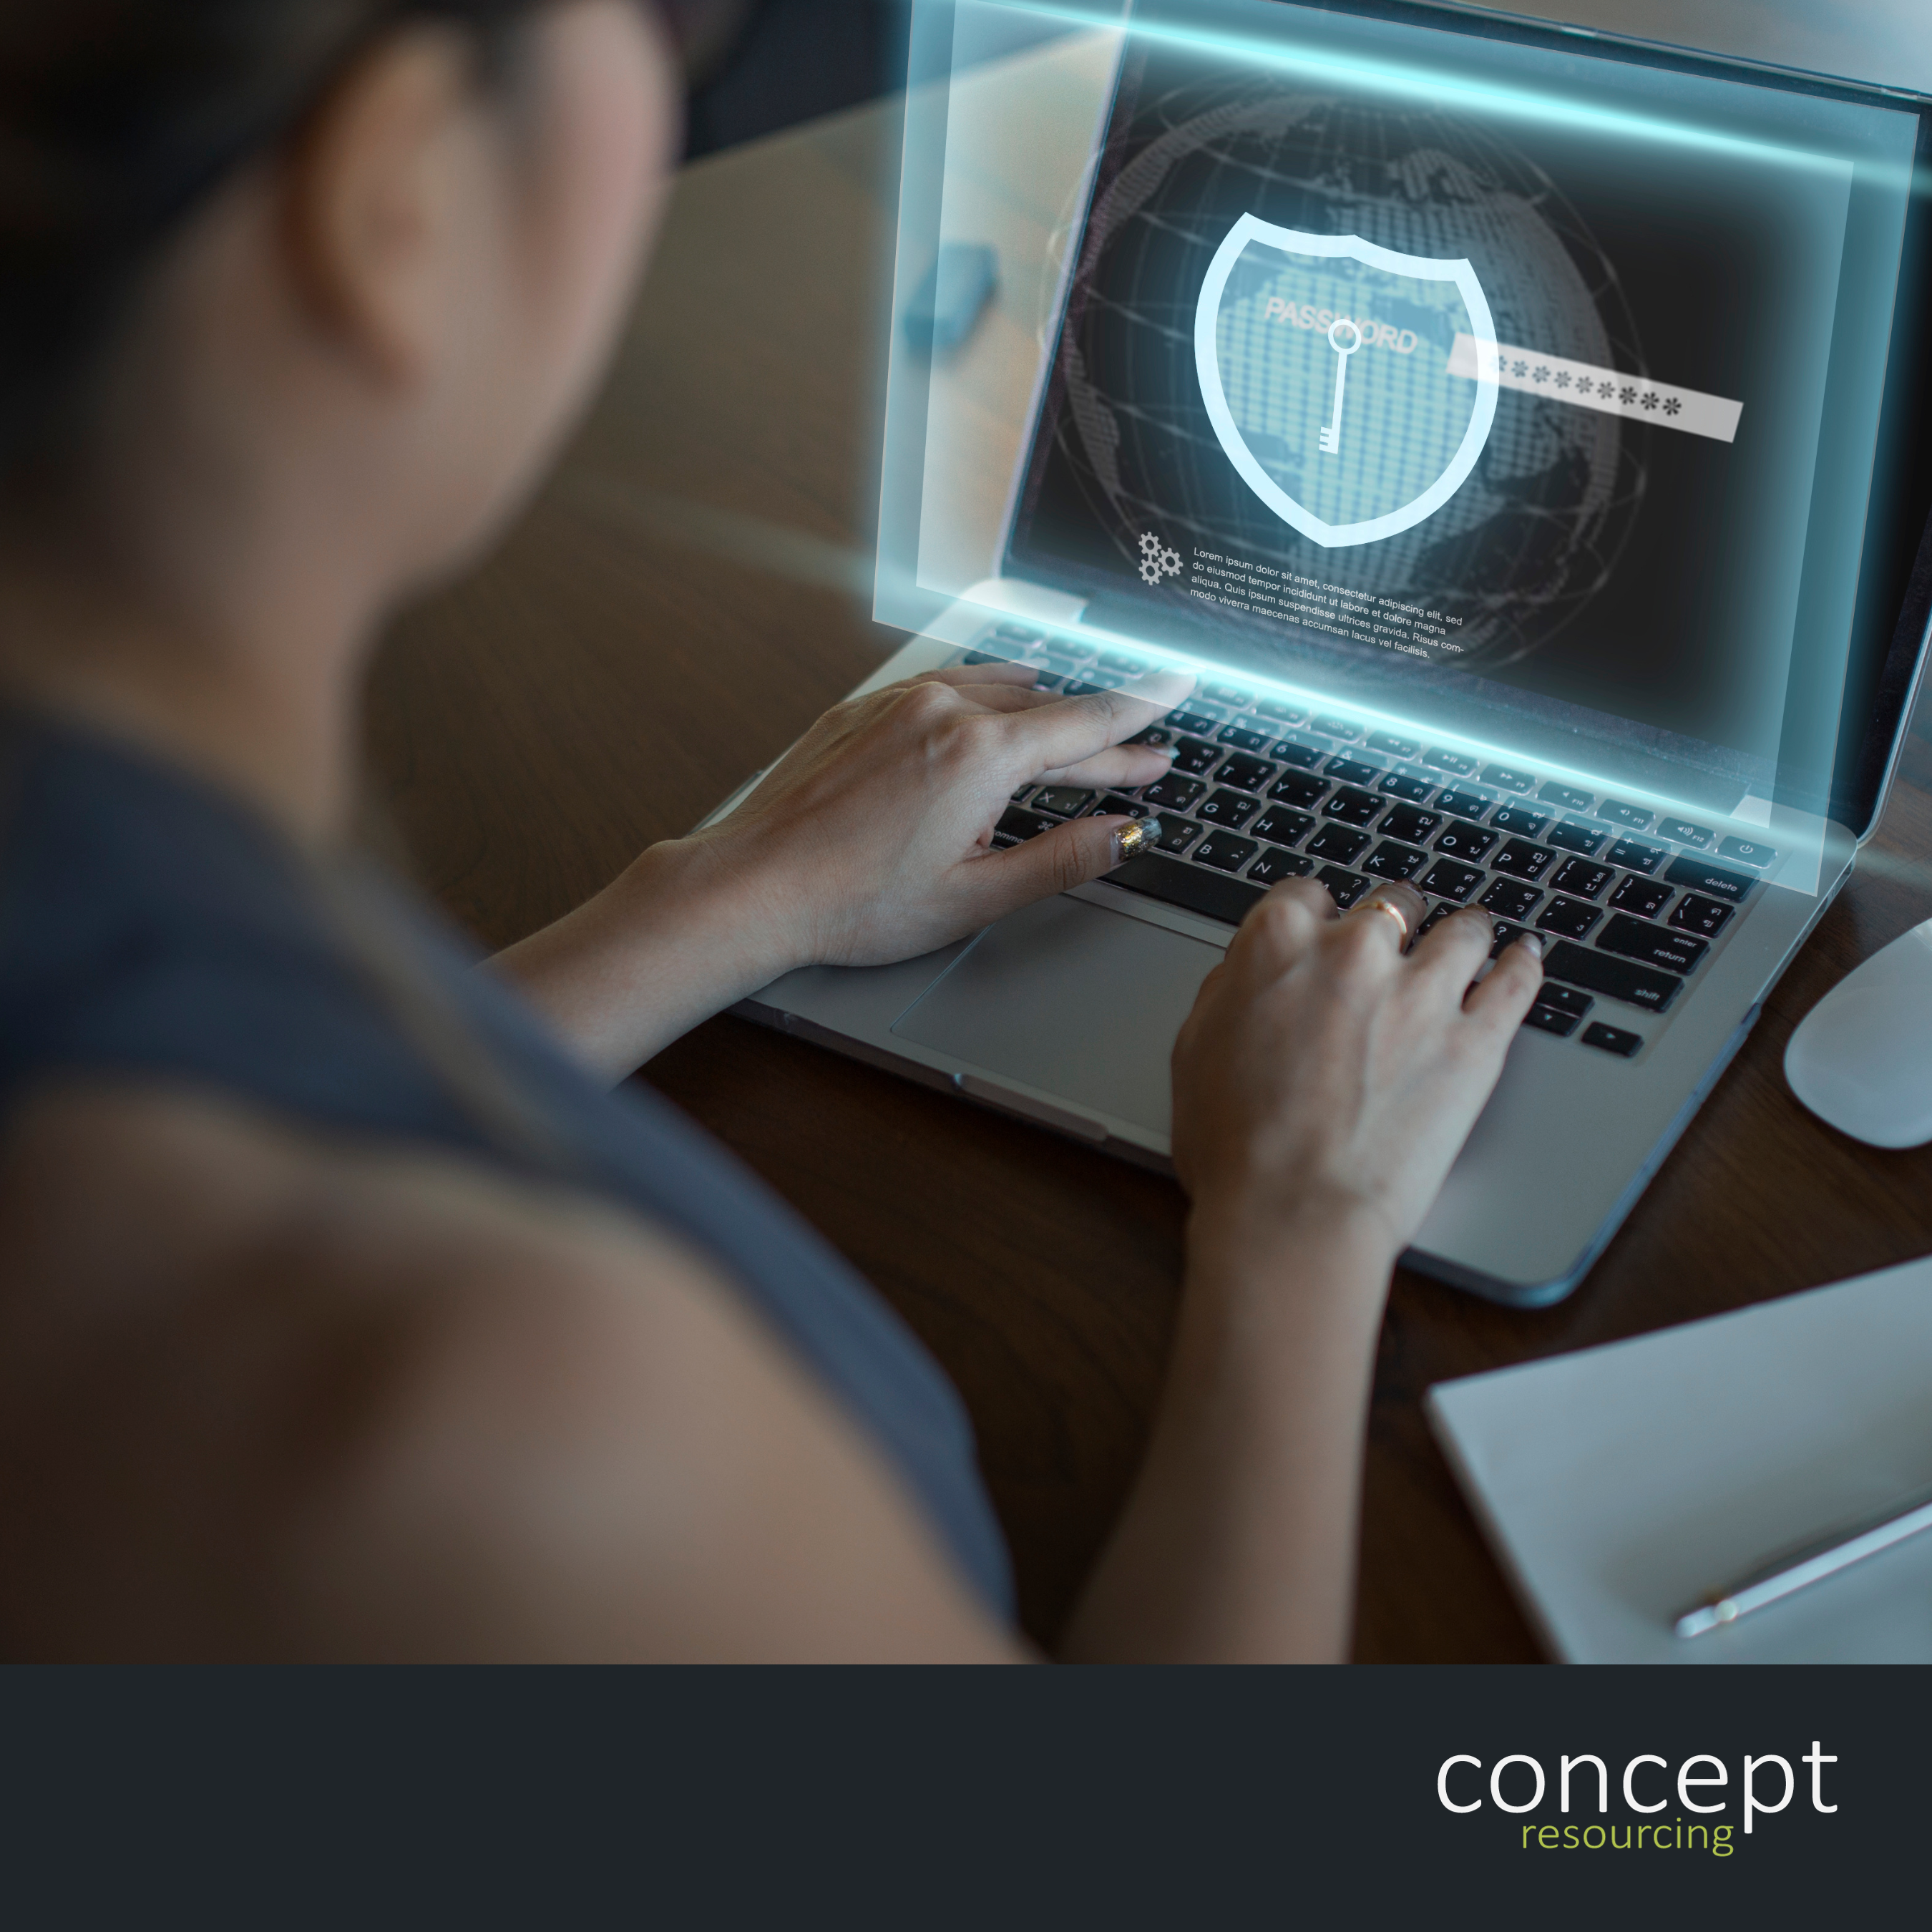 Concept accredited with Cyber Essentials Plus